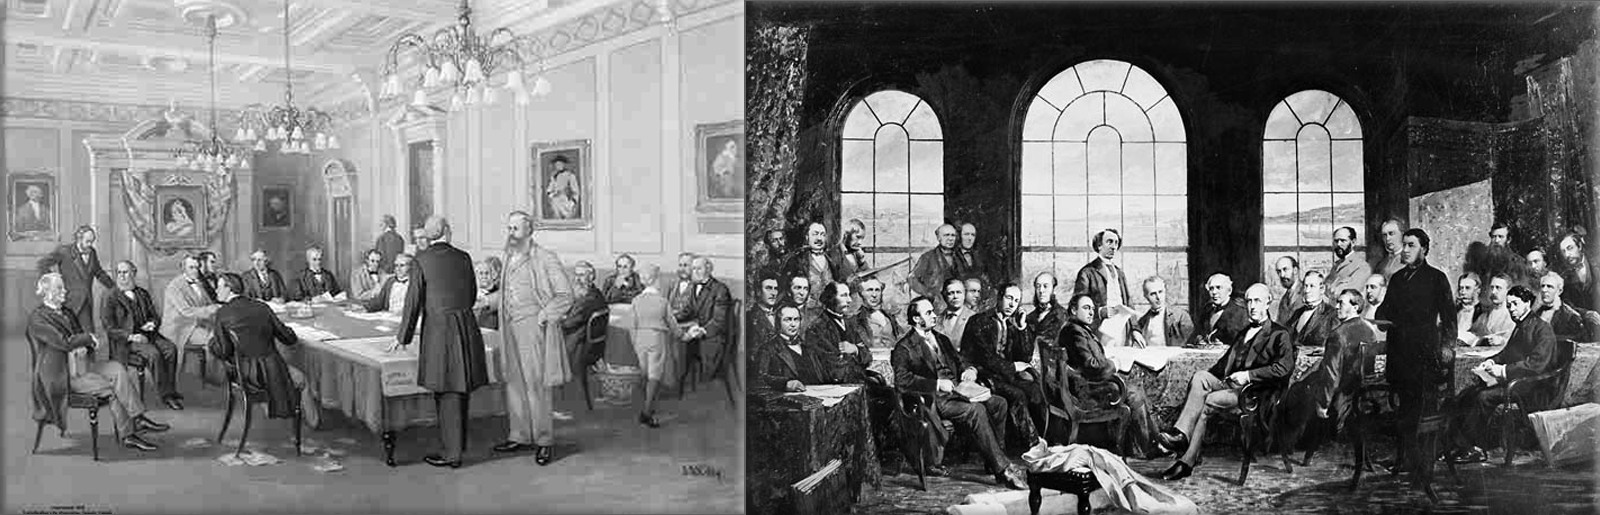 The British North America Act of 1867 takes effect as the Constitution of Canada, creating the Canadian Confederation and the federal dominion of Canada